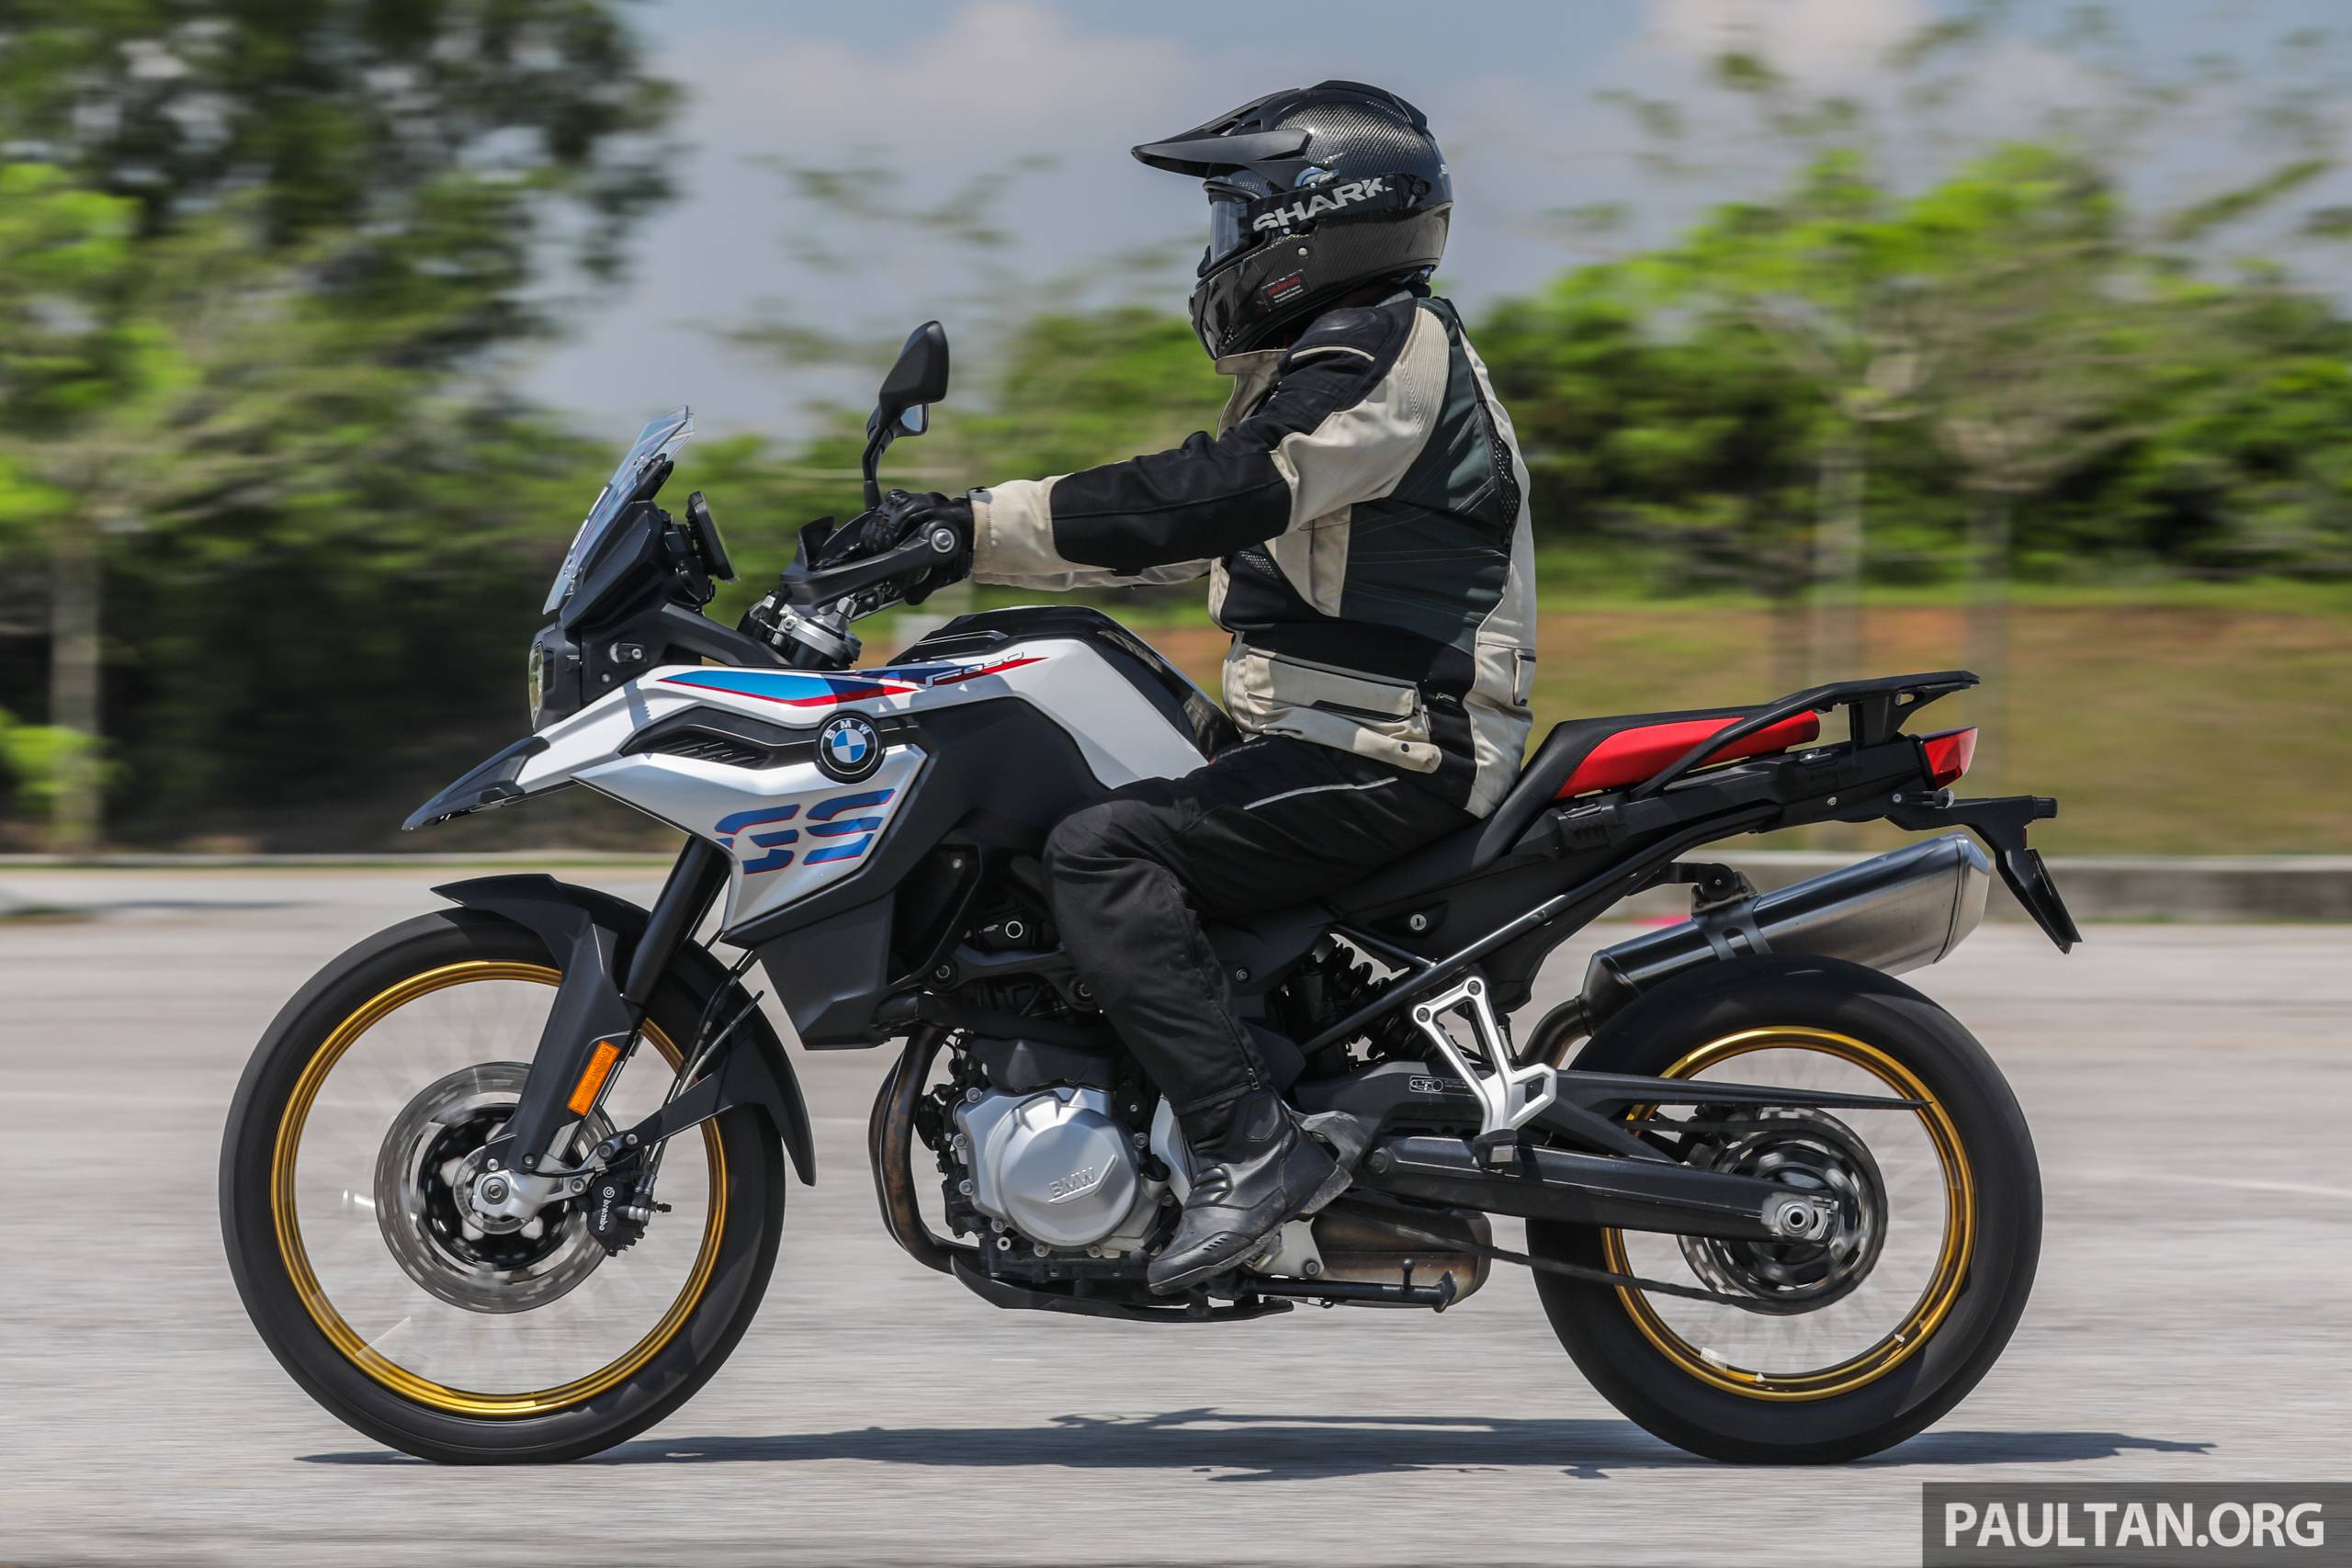 Bmw f 850 gs (2019) - road test, price and review